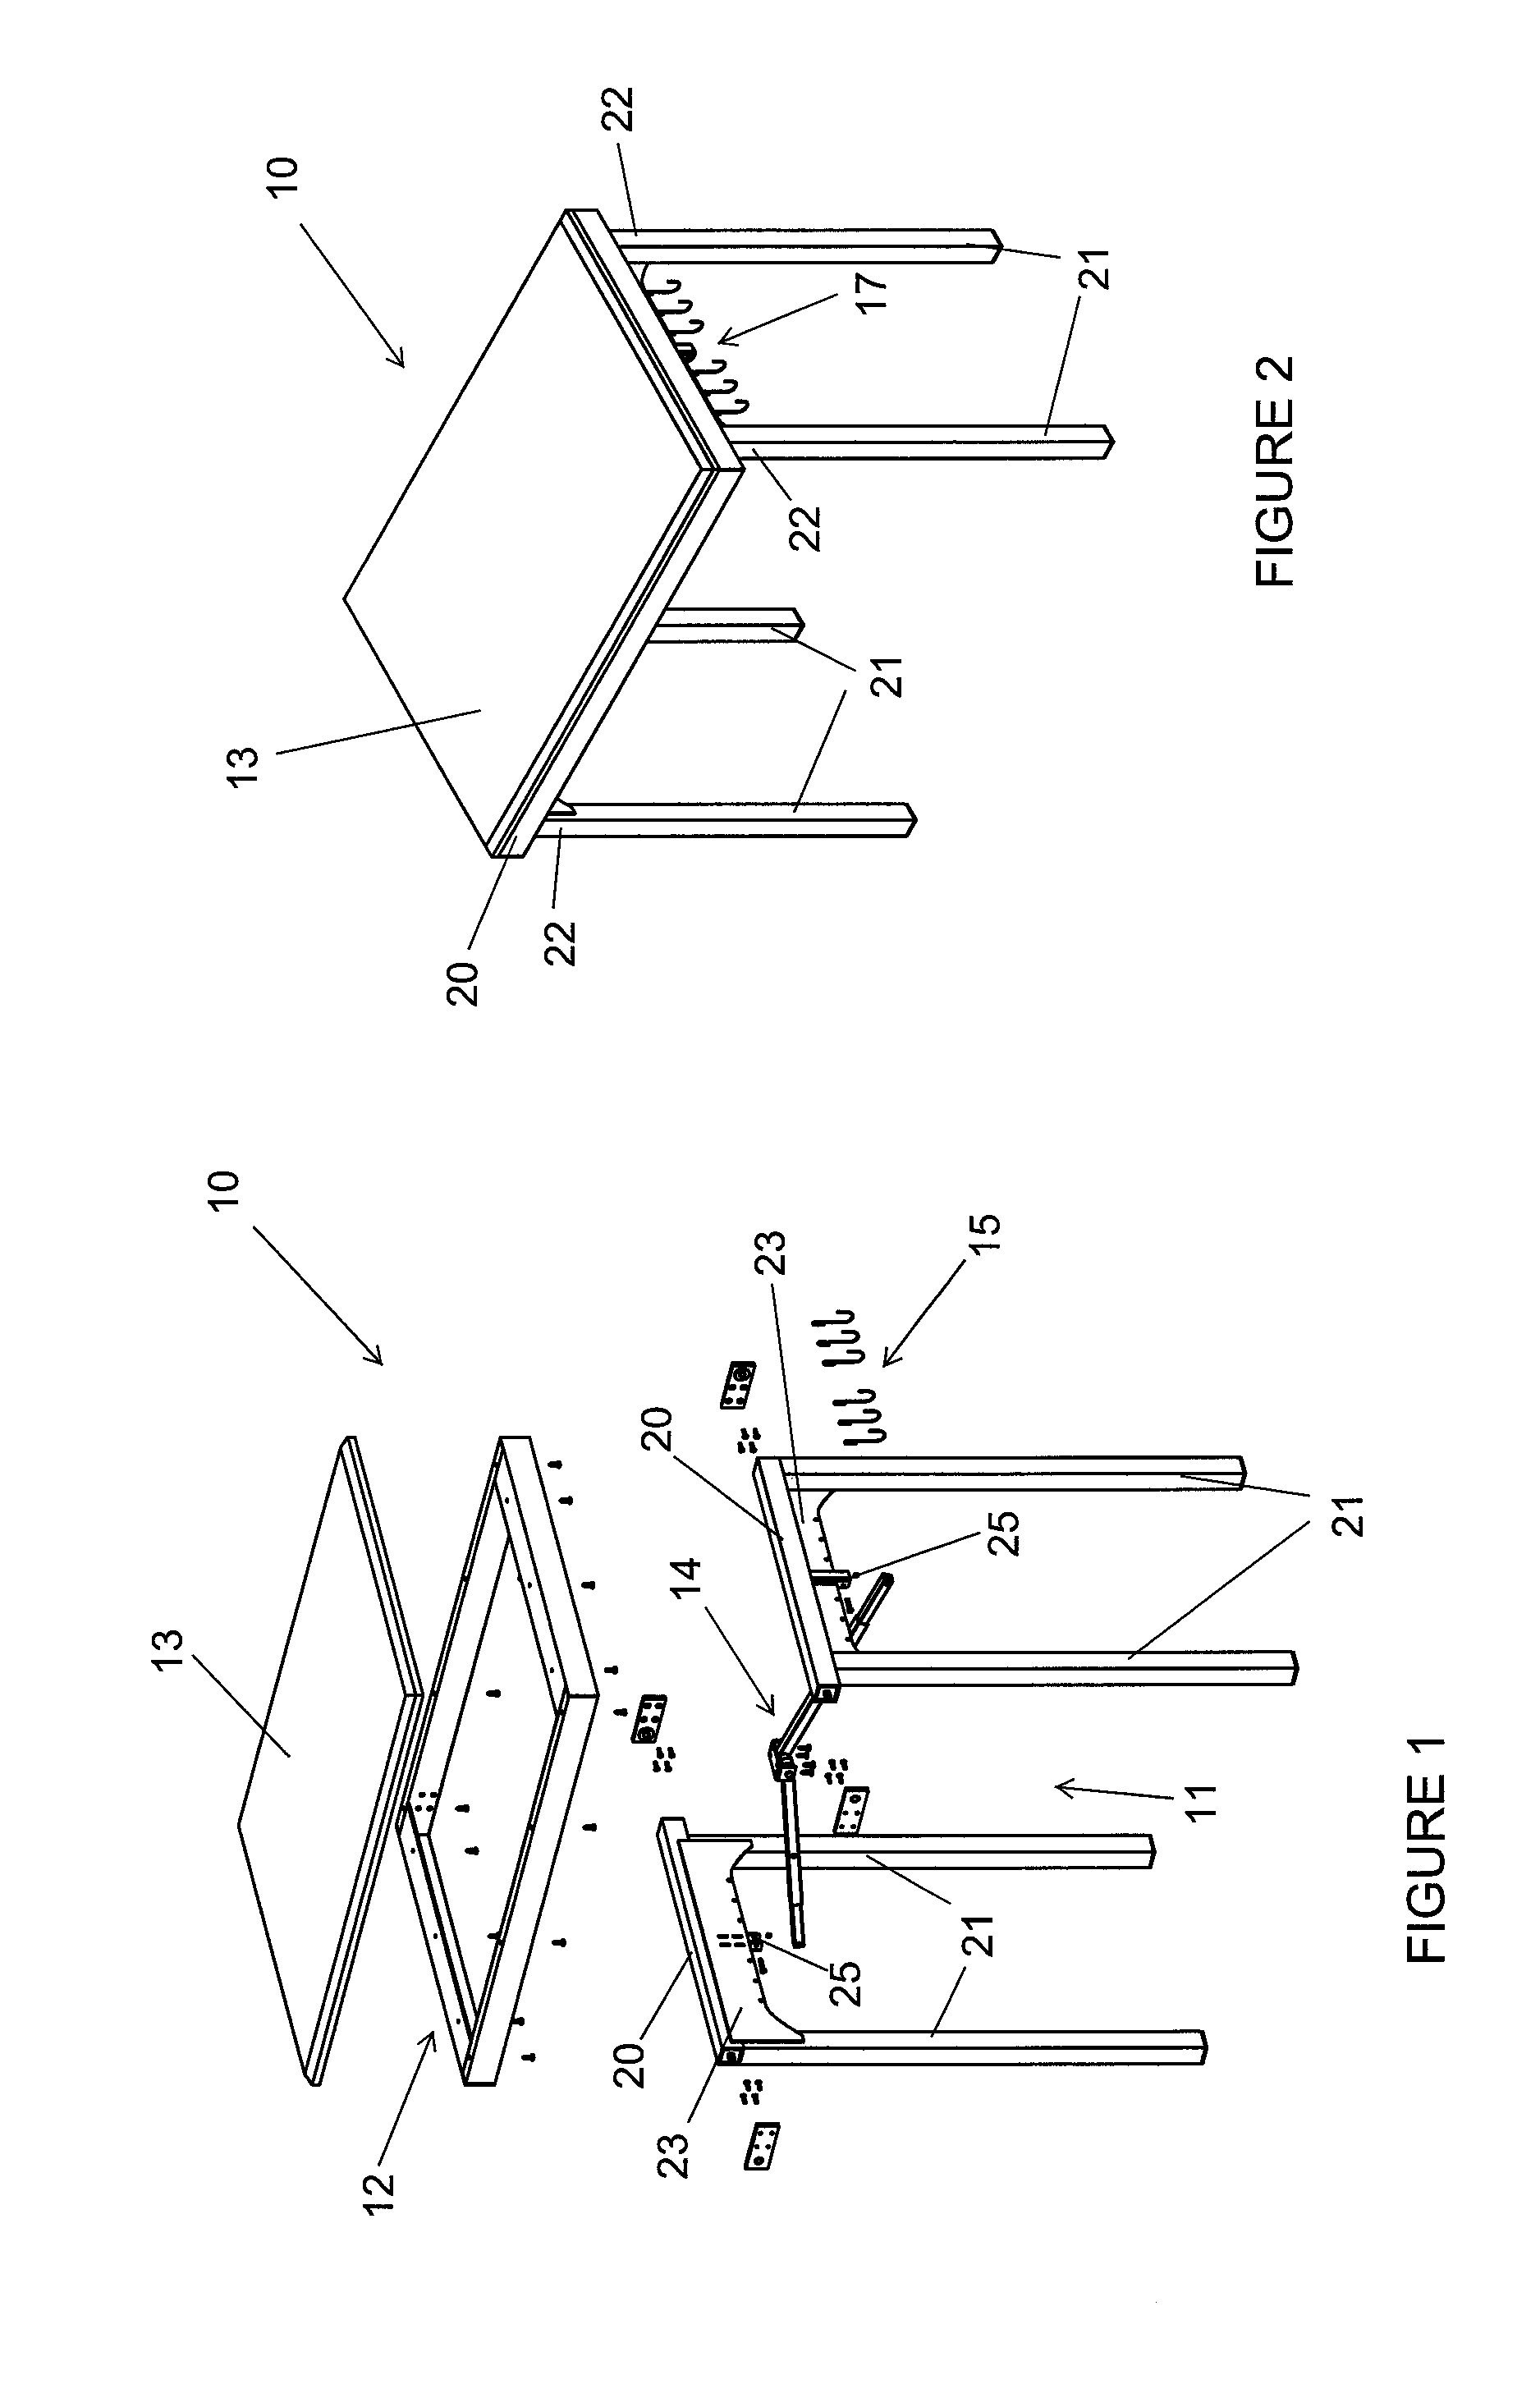 Portable cutting table and associated method